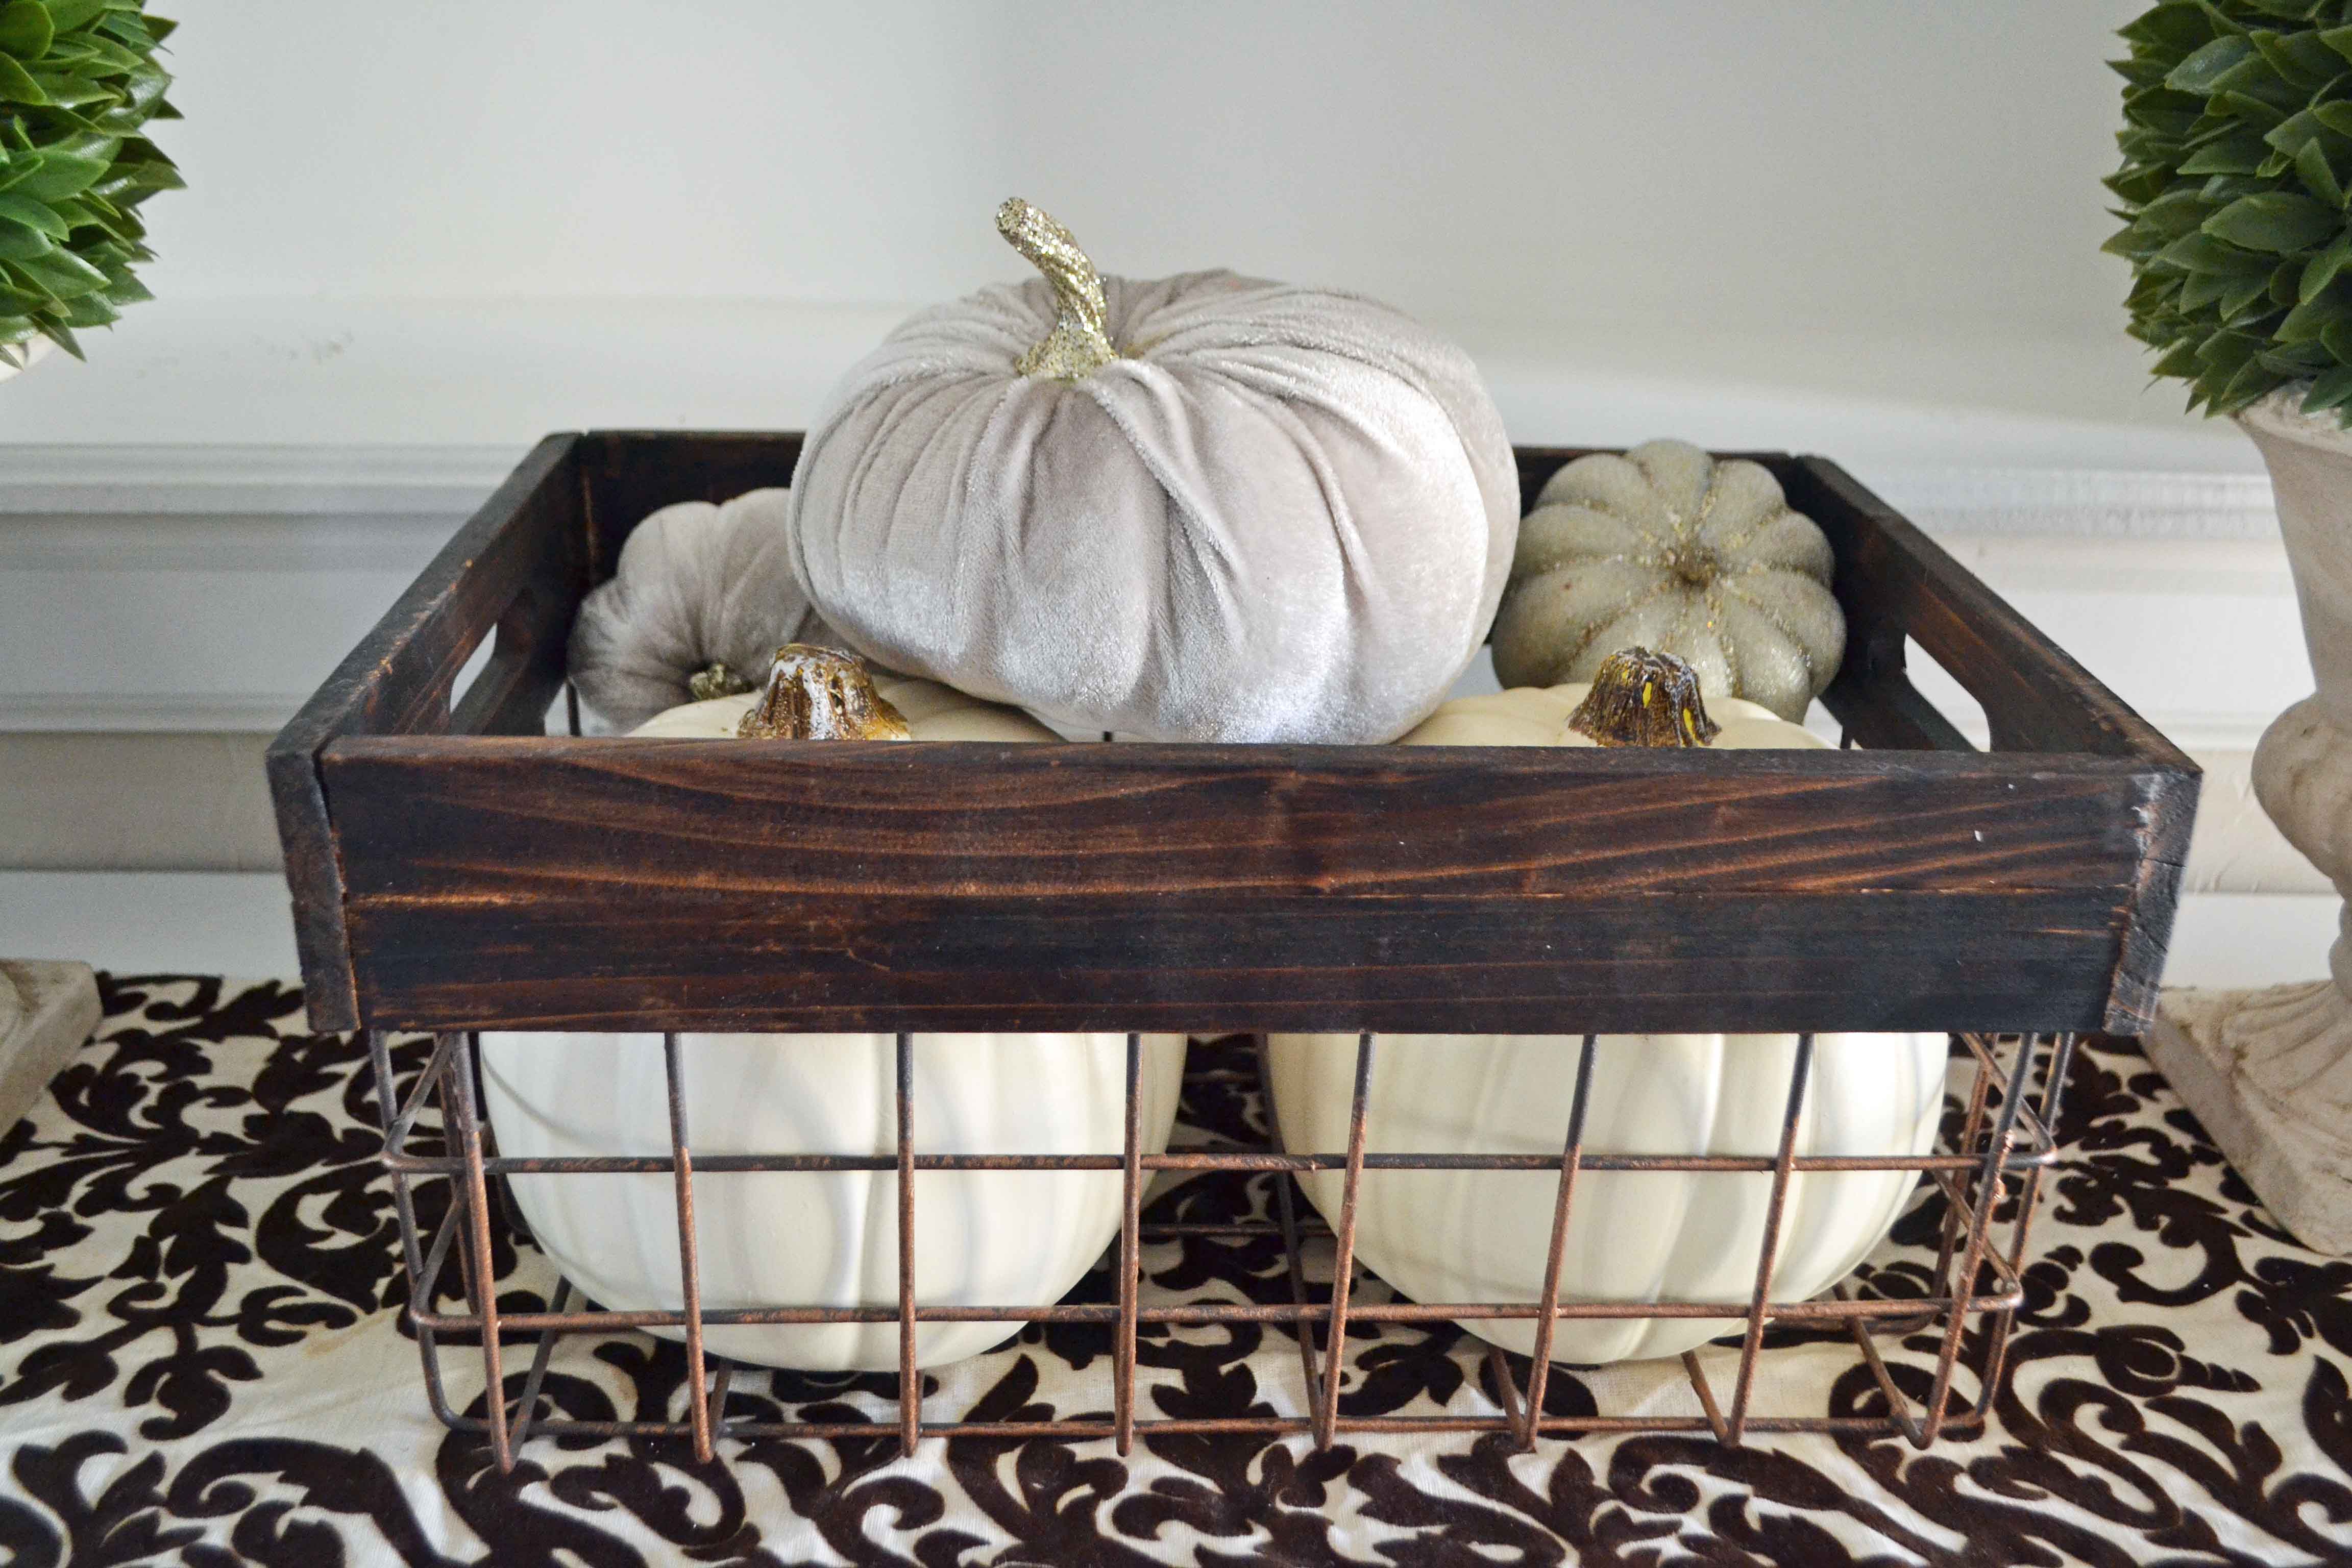 Fall Decor Ideas. Fall Centerpieces. Fall Tablescape Ideas. Fall Mantle Decor Ideas. Pumpkin Cupcakes with Salted Caramel Frosting by Modern Honey